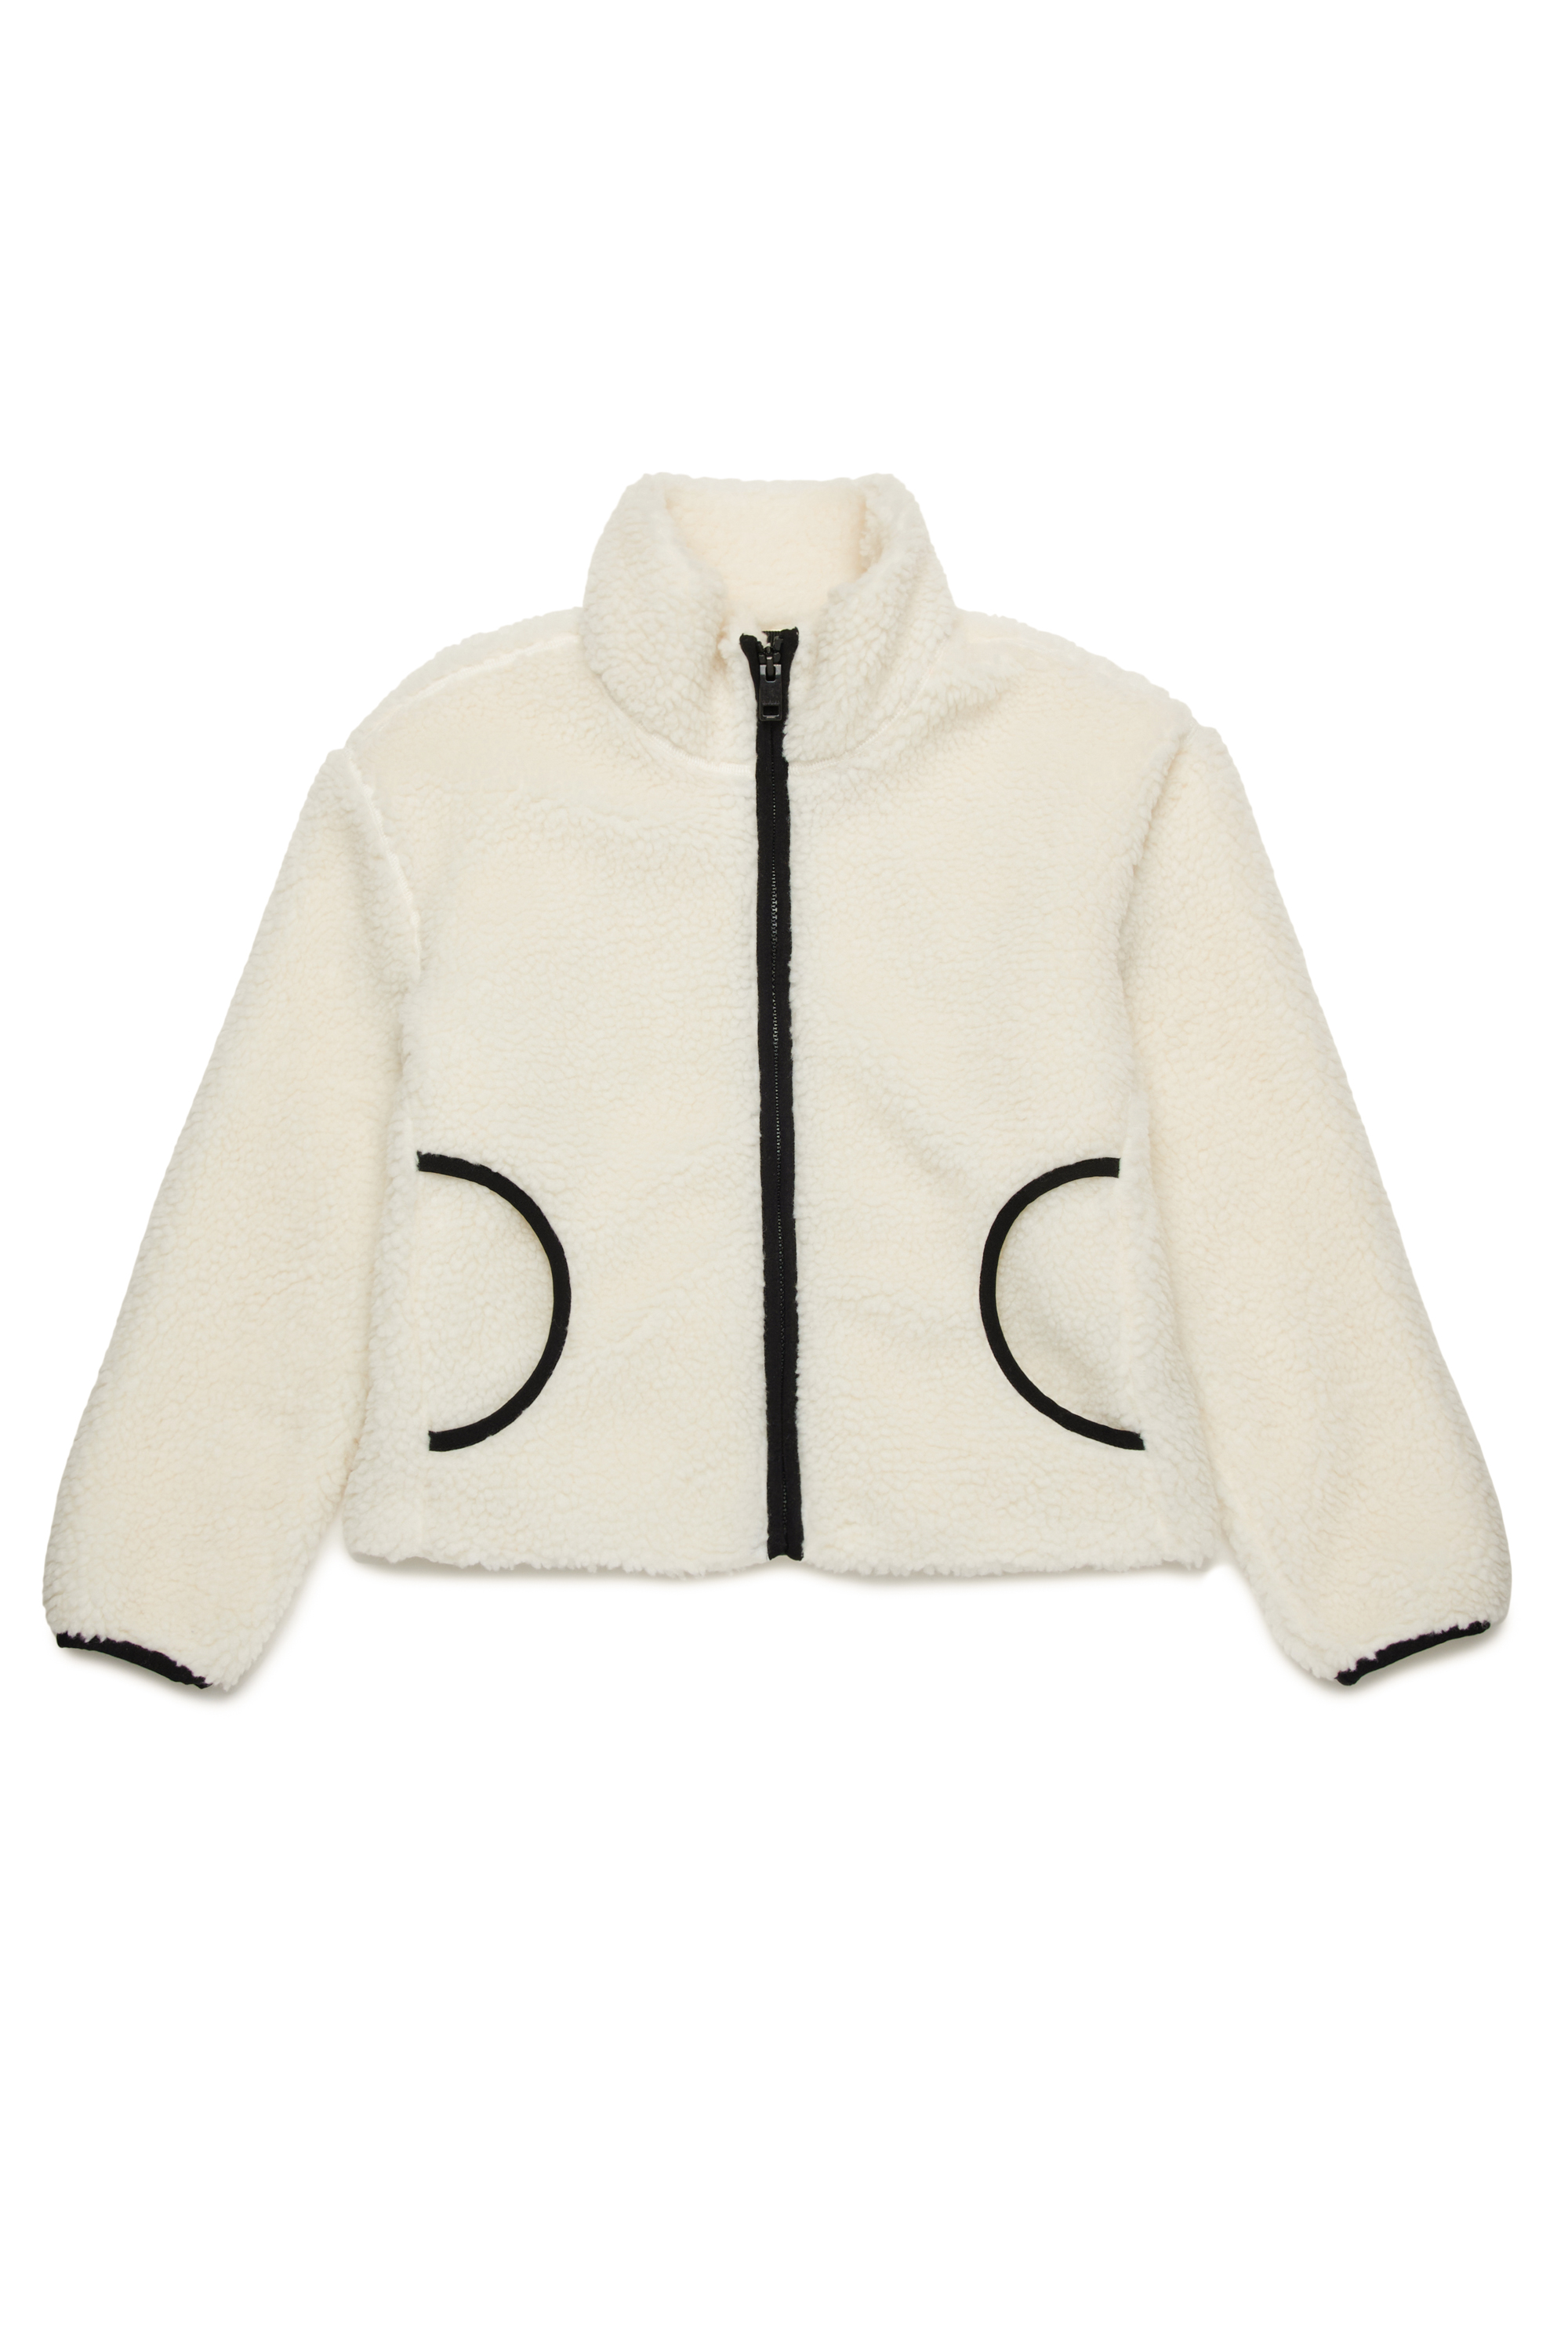 Diesel - JFCHIBI, Donna Giacca teddy con logo Oval D in Bianco - Image 1